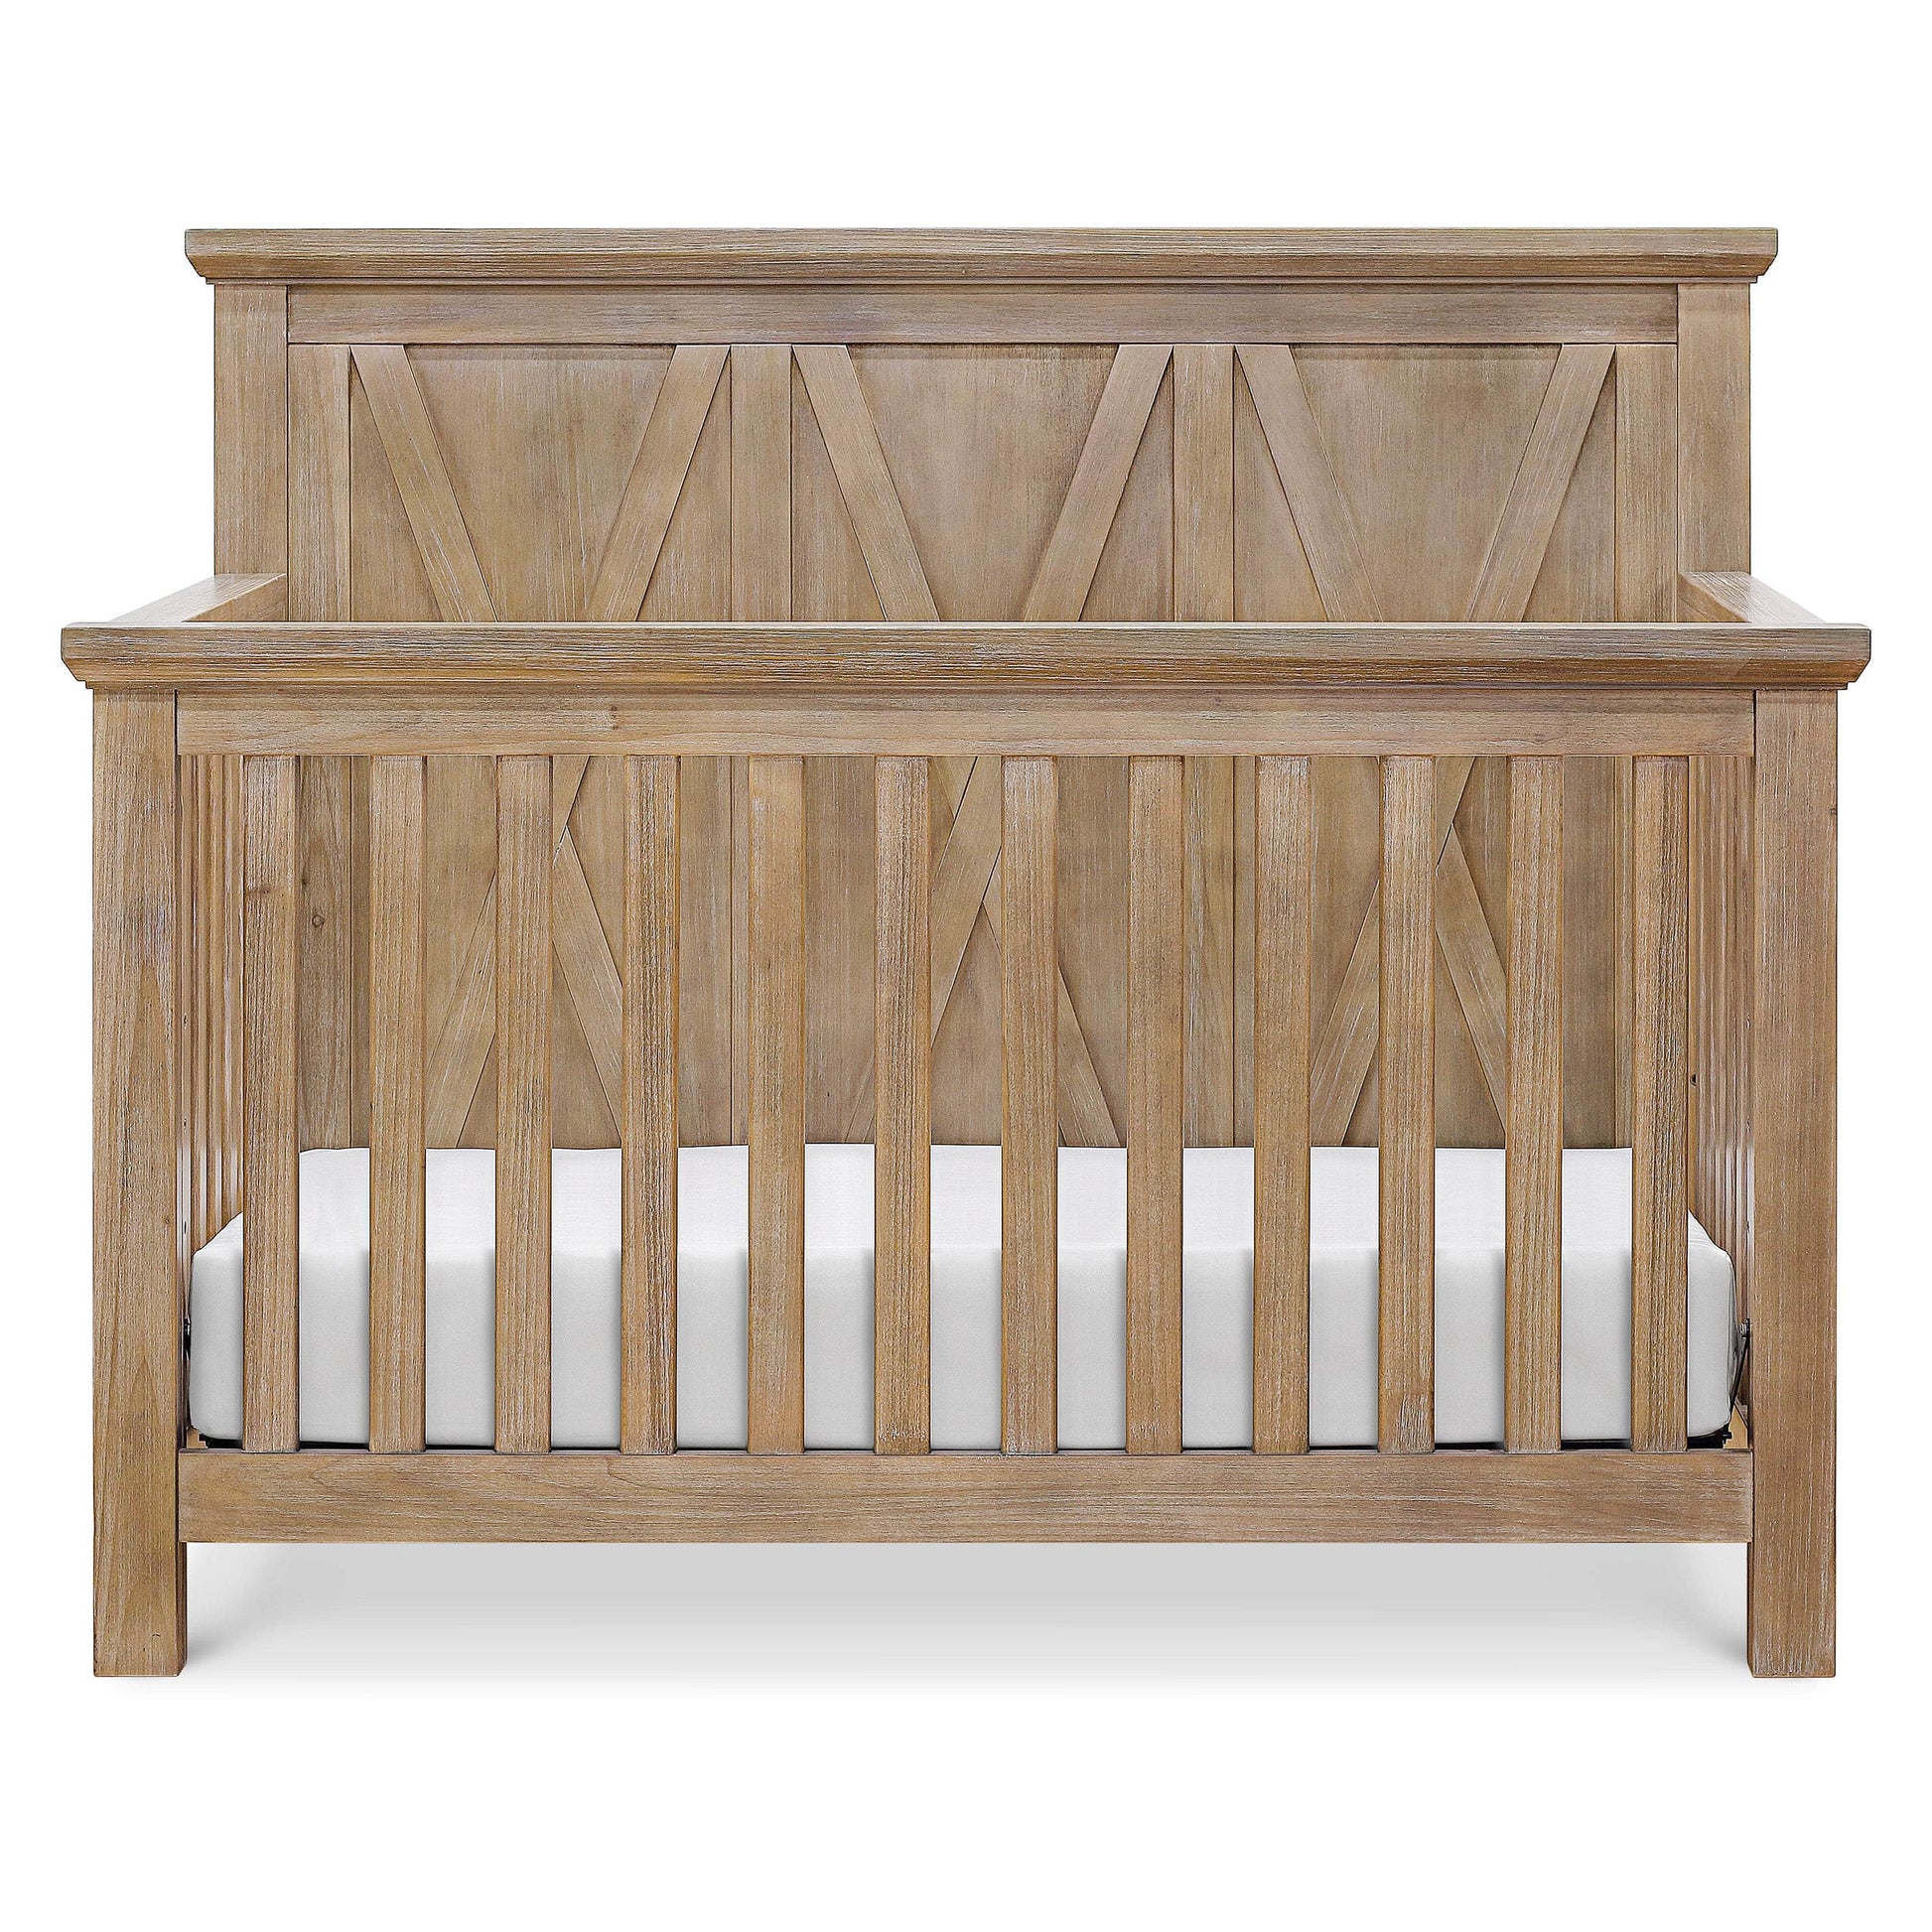 B14501DF,Emory Farmhouse 4-in-1 Convertible Crib in Driftwood